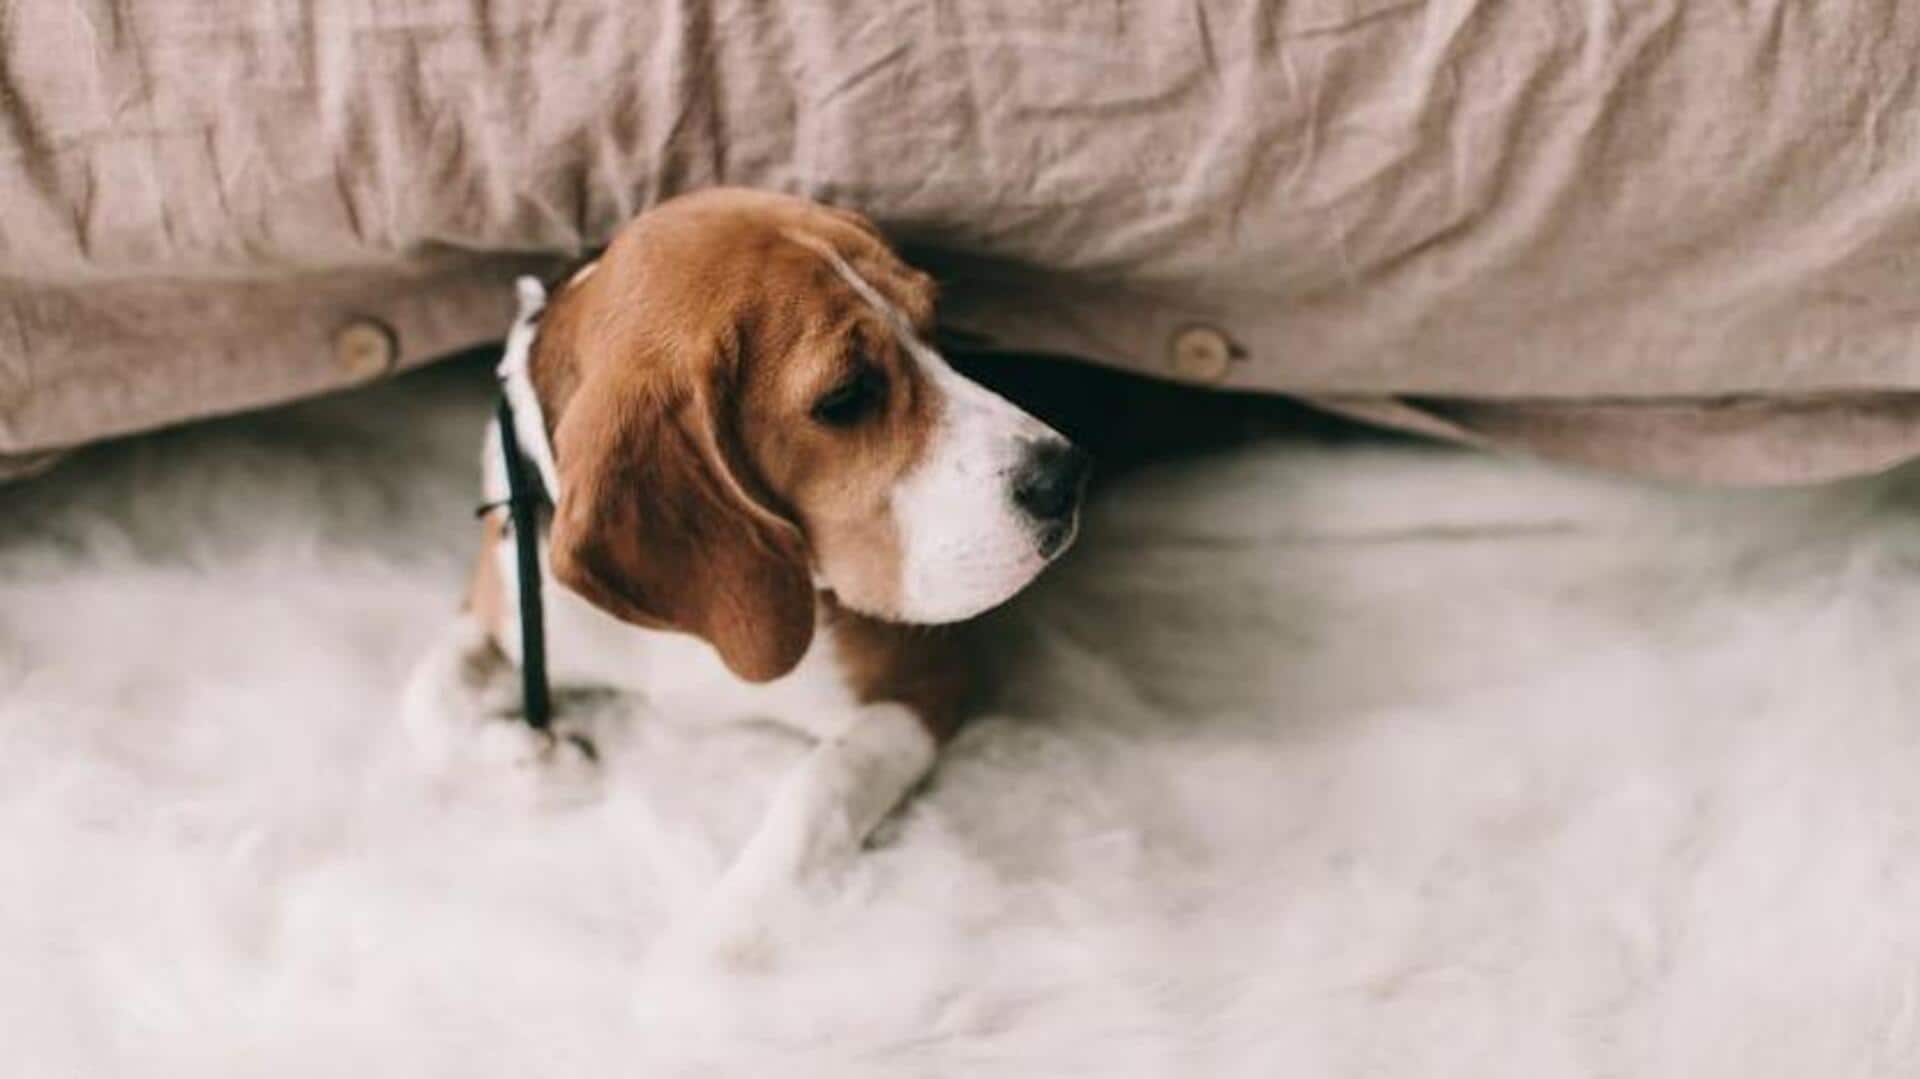 Beagle weight management tips to take note of 